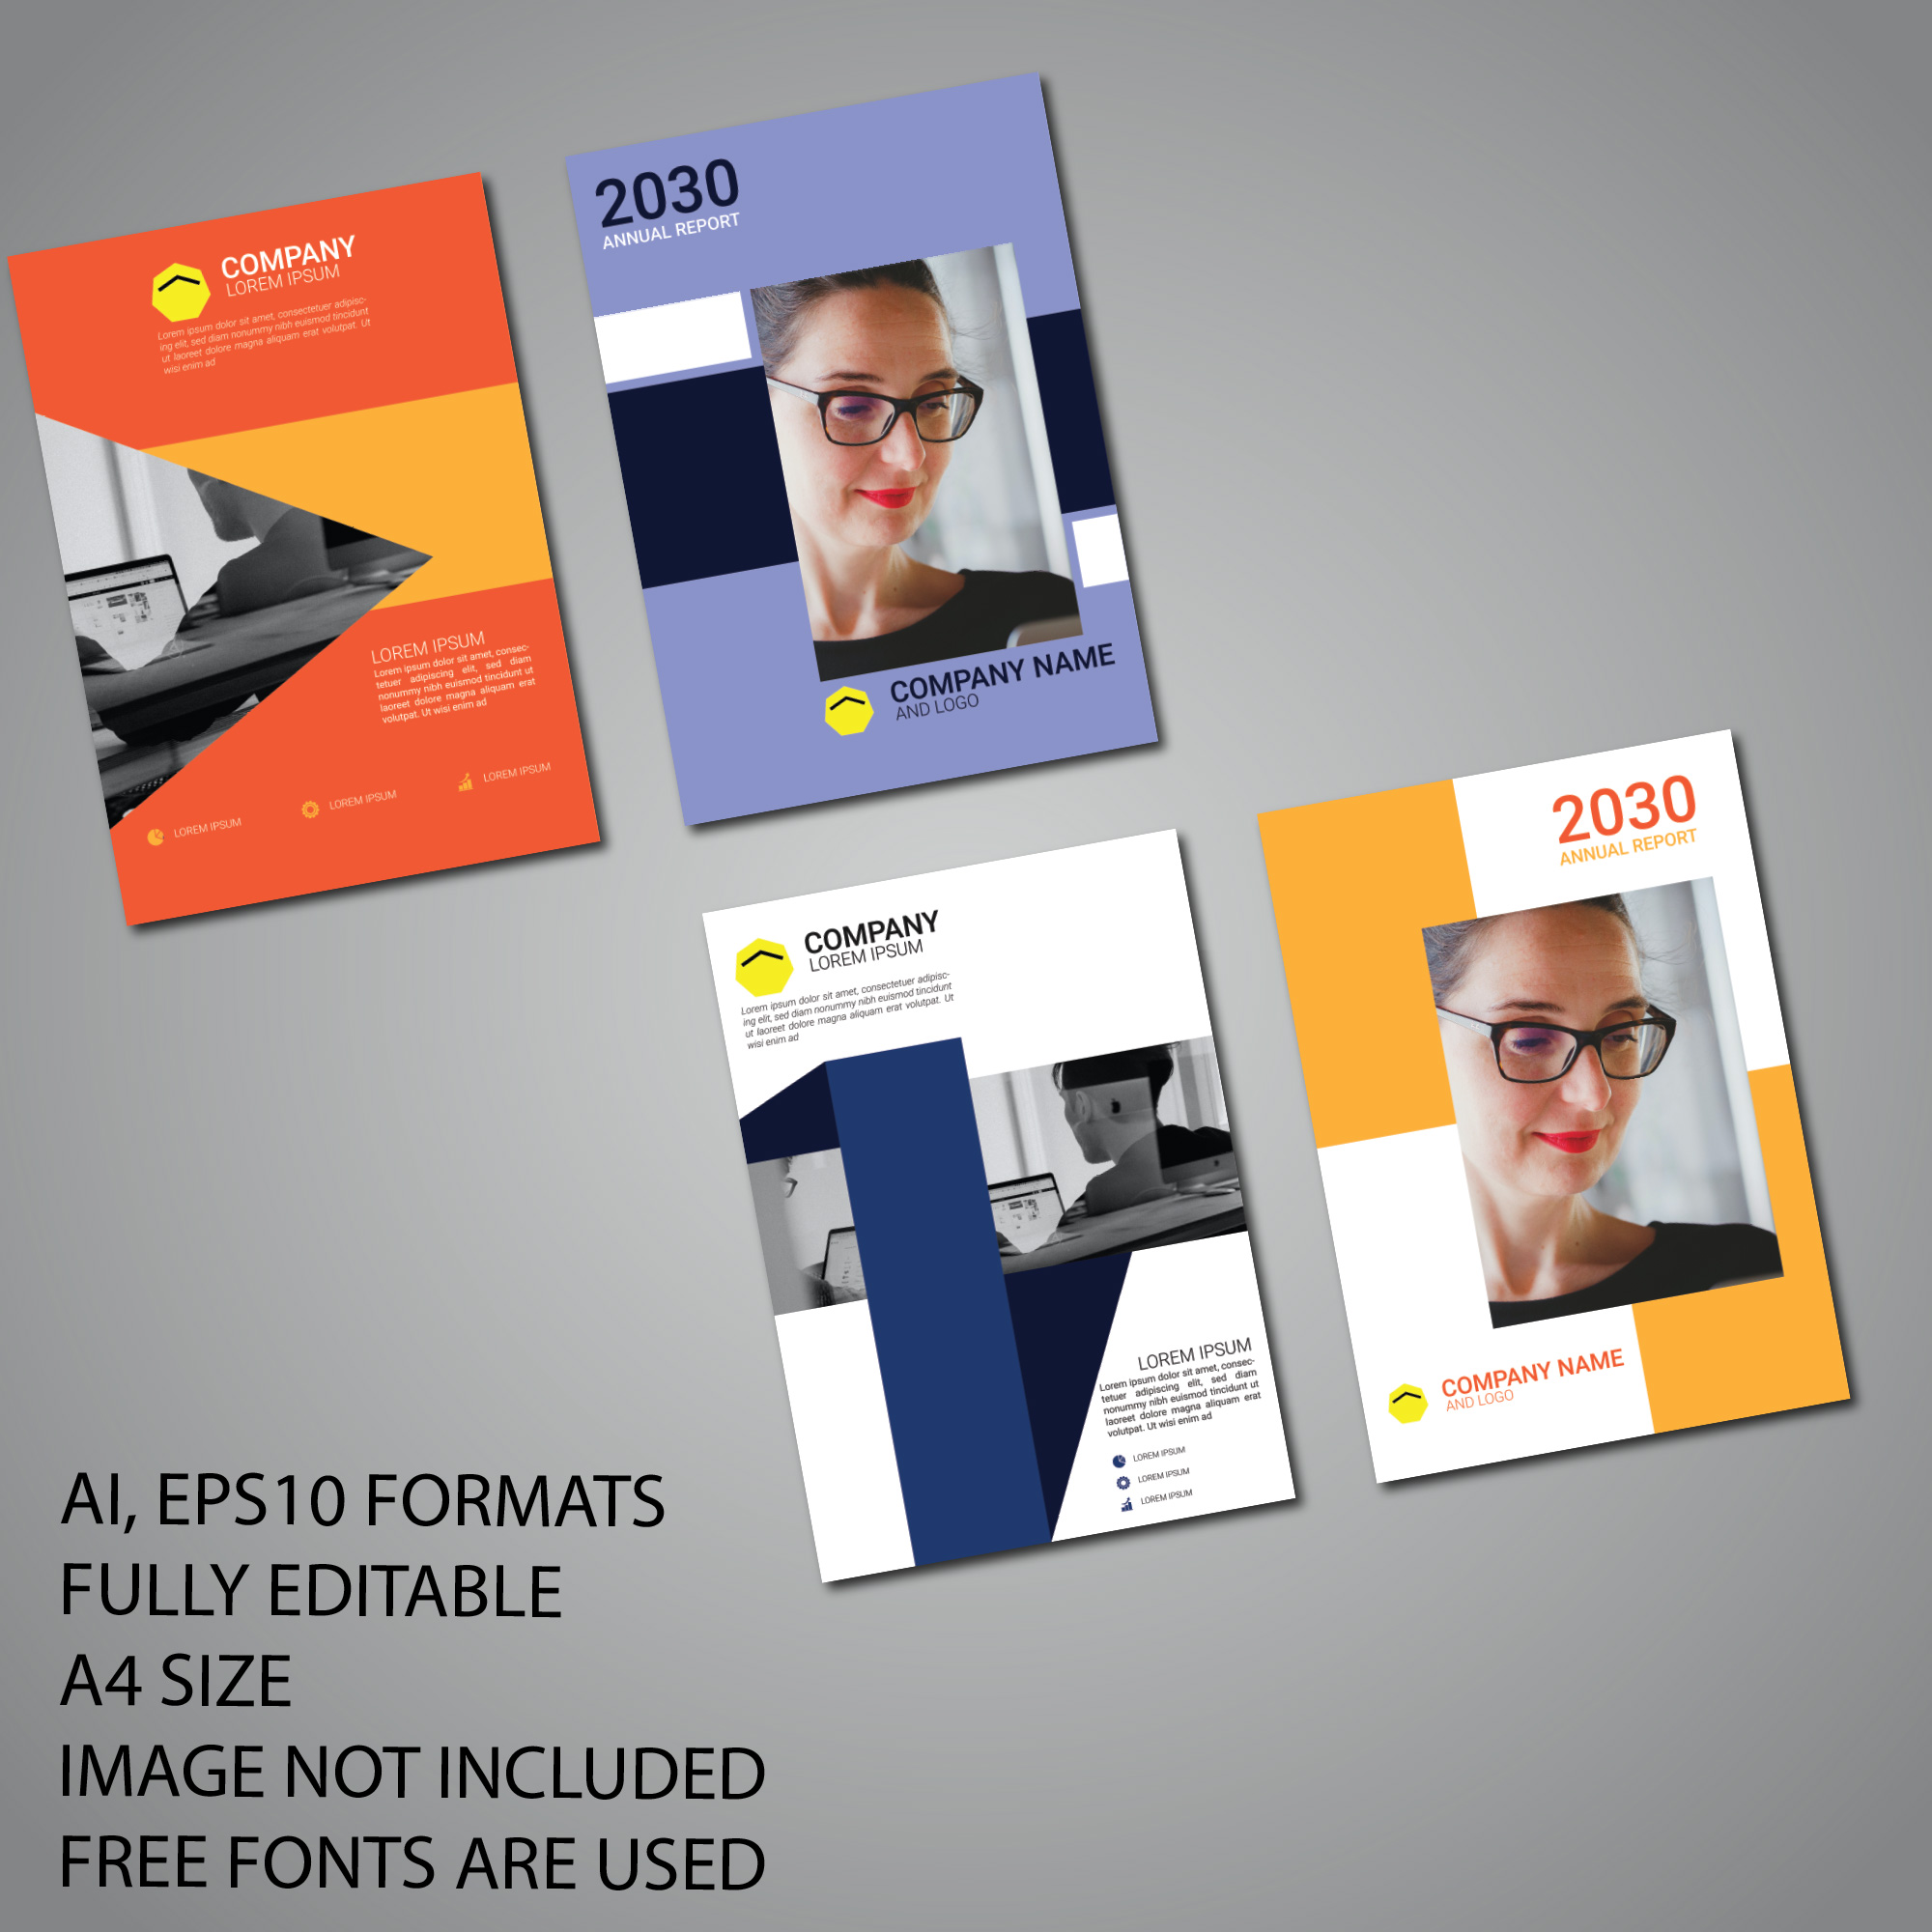 Cover design for an annual report, business magazine vector templates preview image.